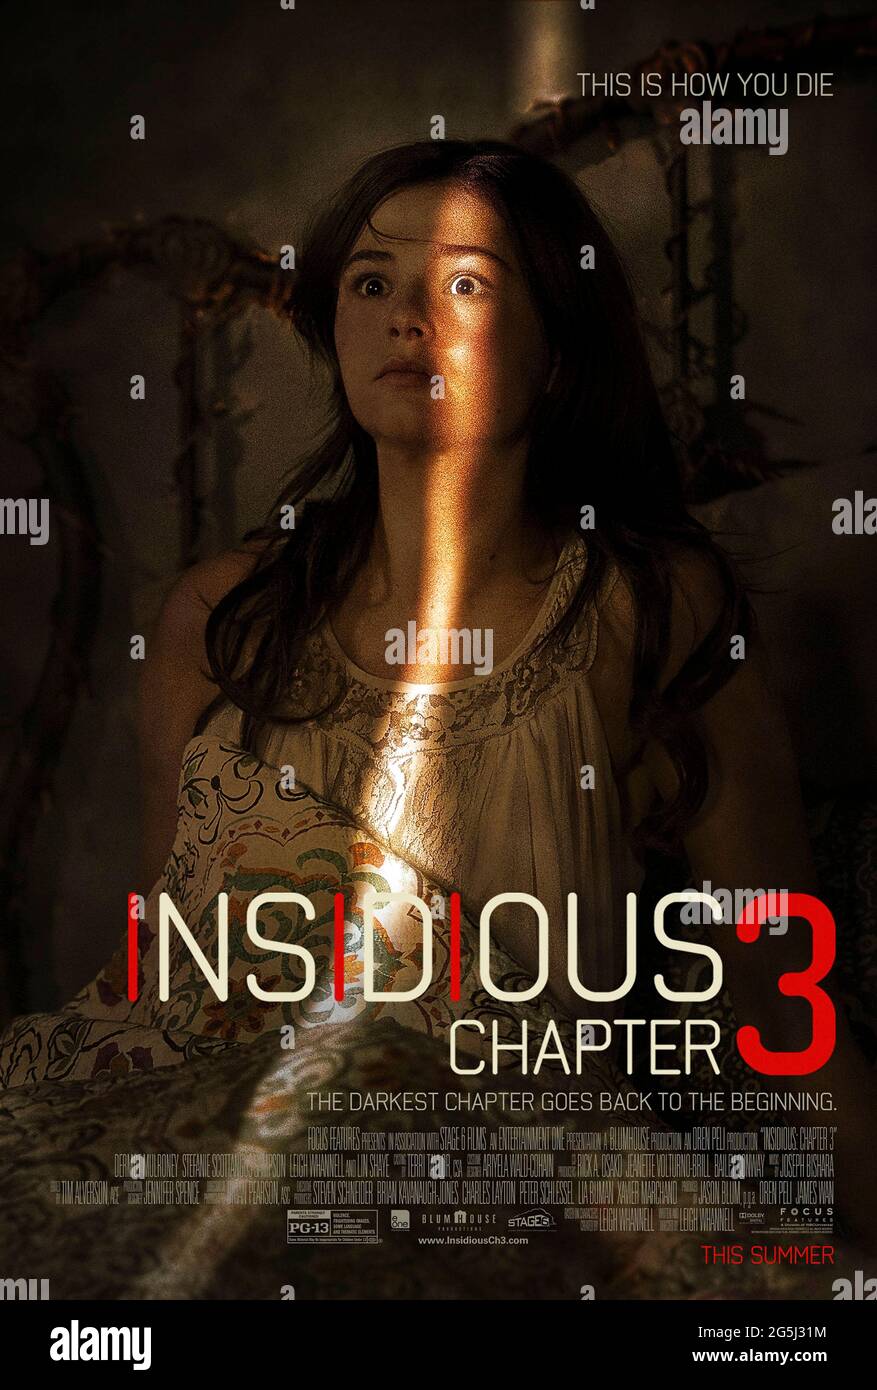 Insidious: Chapter 3 (2013) directed by James Wan and starring Patrick Wilson, Rose Byrne and Barbara Hershey. Prequel revealing how gifted psychic Elise Rainier used her ability to contact the dead to help a teenage girl who has been targeted by a dangerous supernatural entity. Stock Photo